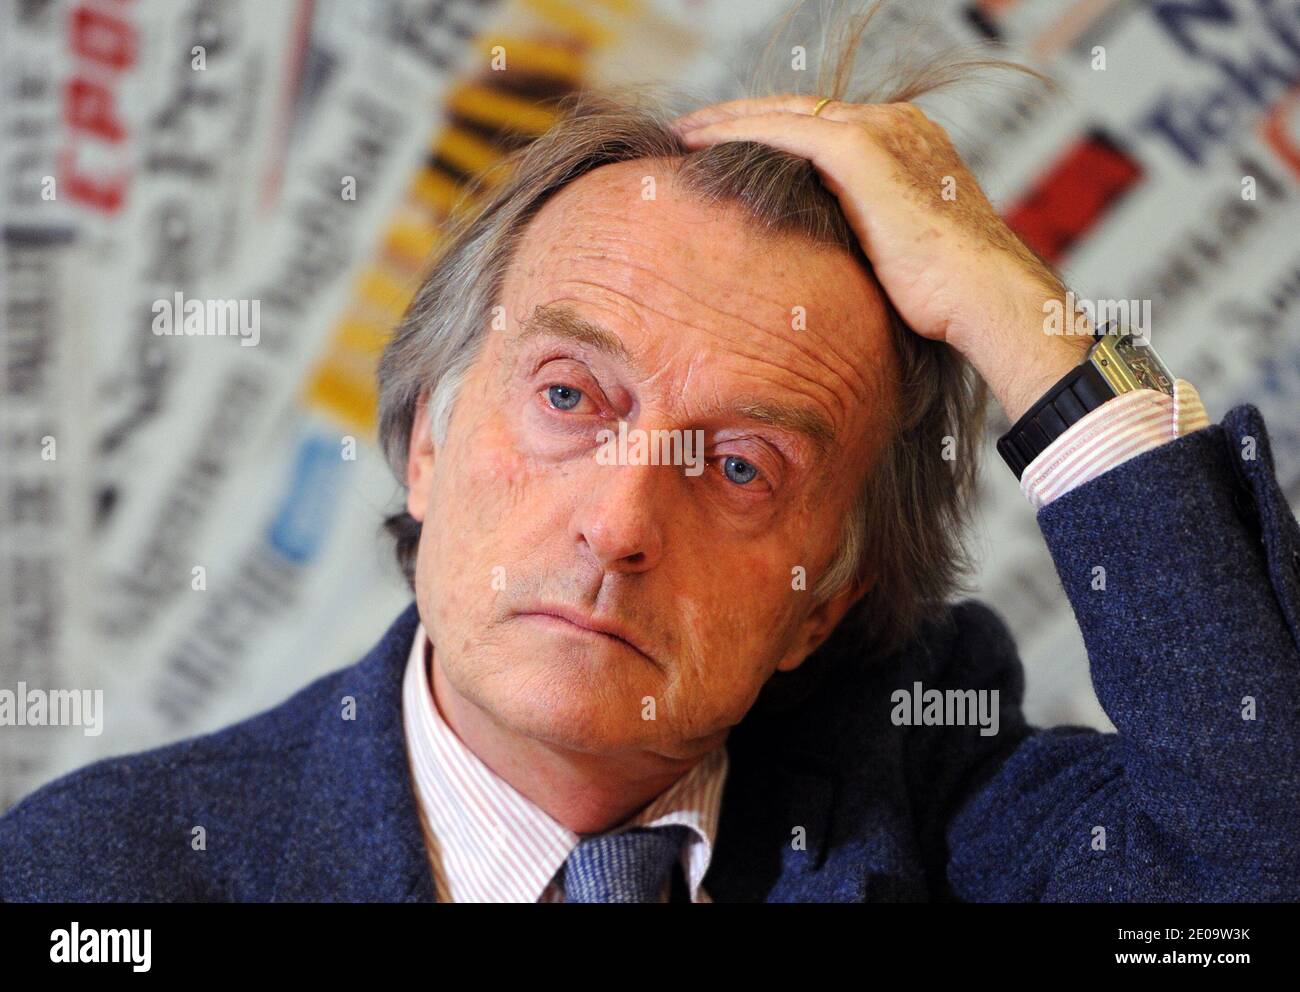 Ferrari Chairman Luca Cordero di Montezemolo speaks to Foreign Press Association in Rome, Italy on february 7, 2012 during the presentation of the 'Italo' train, the NTV new high-speed train. The train ,named 'Italo', is part of the latest generation of high-speed rail travel and 'the most modern train in Europe,' featuring a small cinema on board and a WiFi Internet connection throughout, Di Montezemolo said.NTV is the first private operator on the italian high speed rail network which will start operations in 2012. Photo by Eric Vandeville/ABACAPRESS.COM Stock Photo